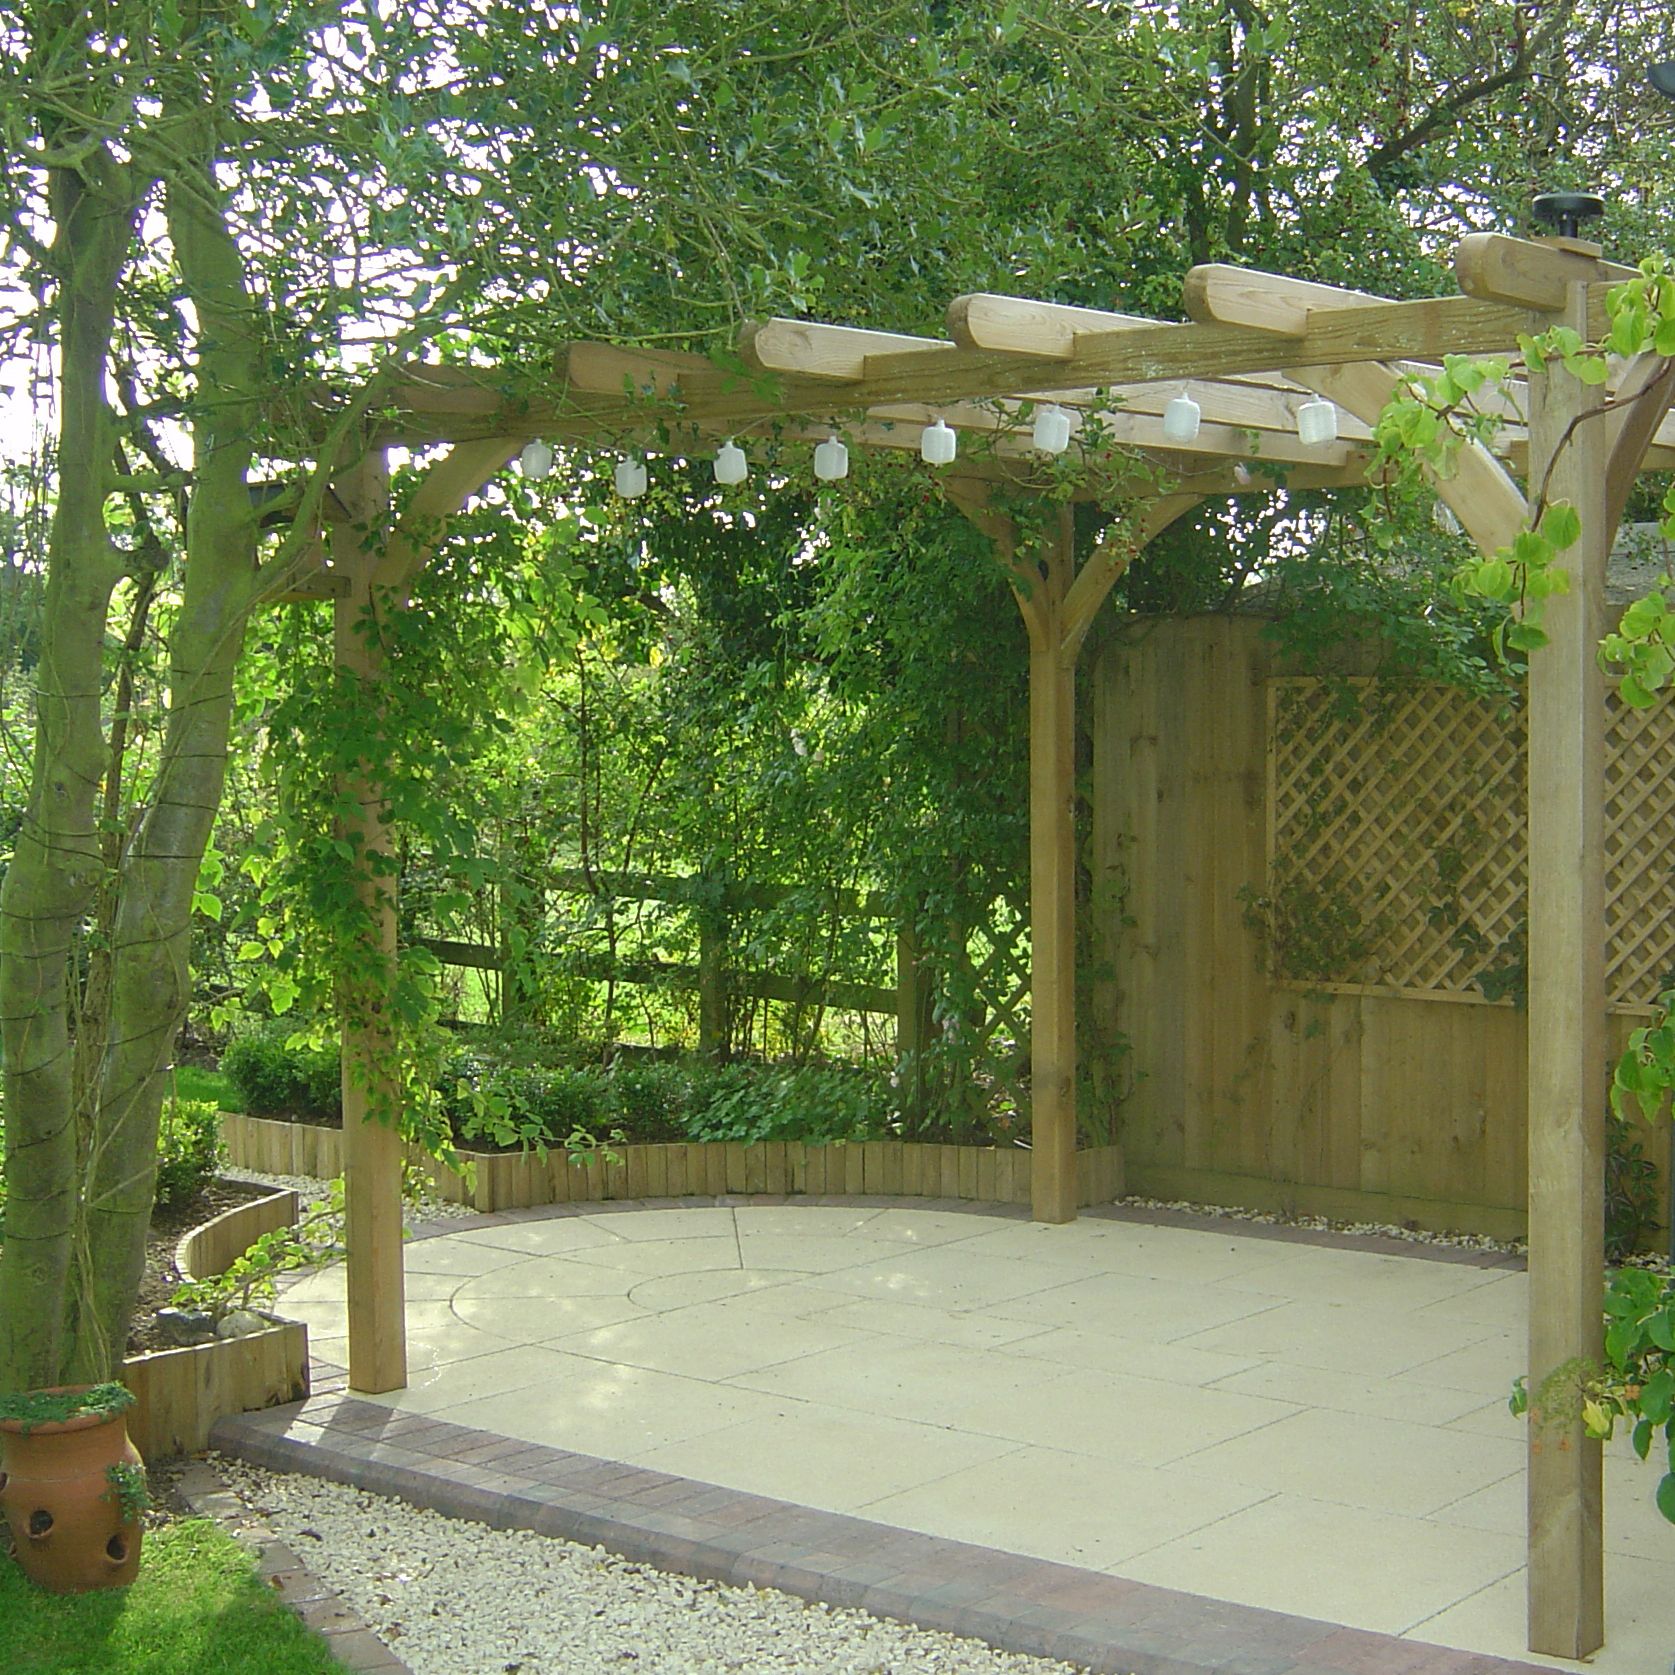 The Bradstone Textured Paving Buff Circle and complimenting paving are perfect for creating a base for a pergola!